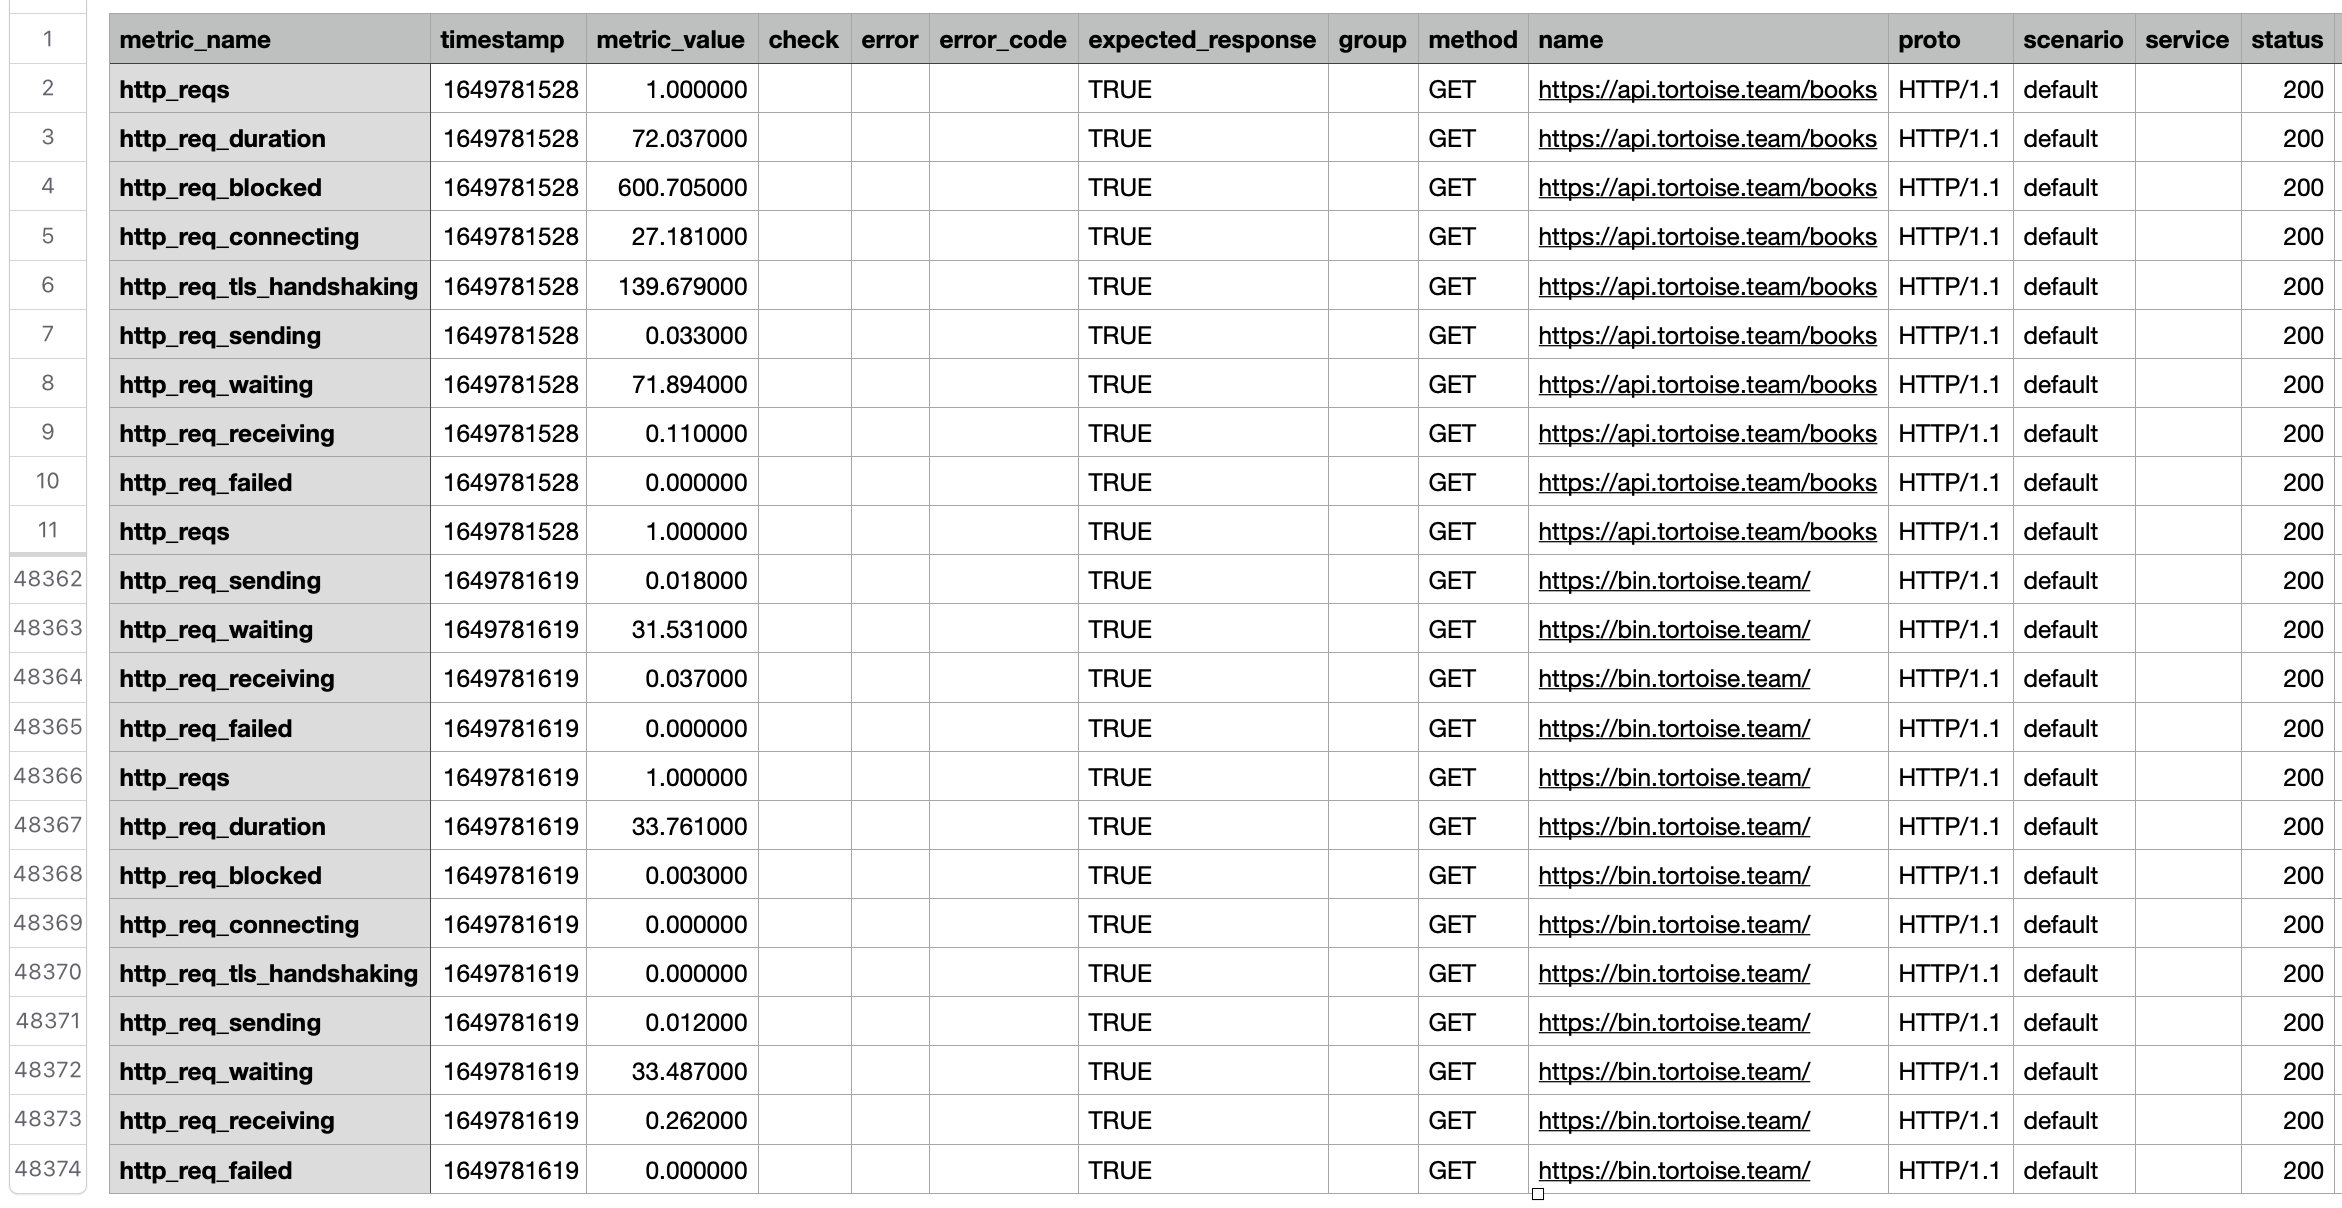 Figure 2.4 CSV k6 test result output, rows 12-48361 are hidden.